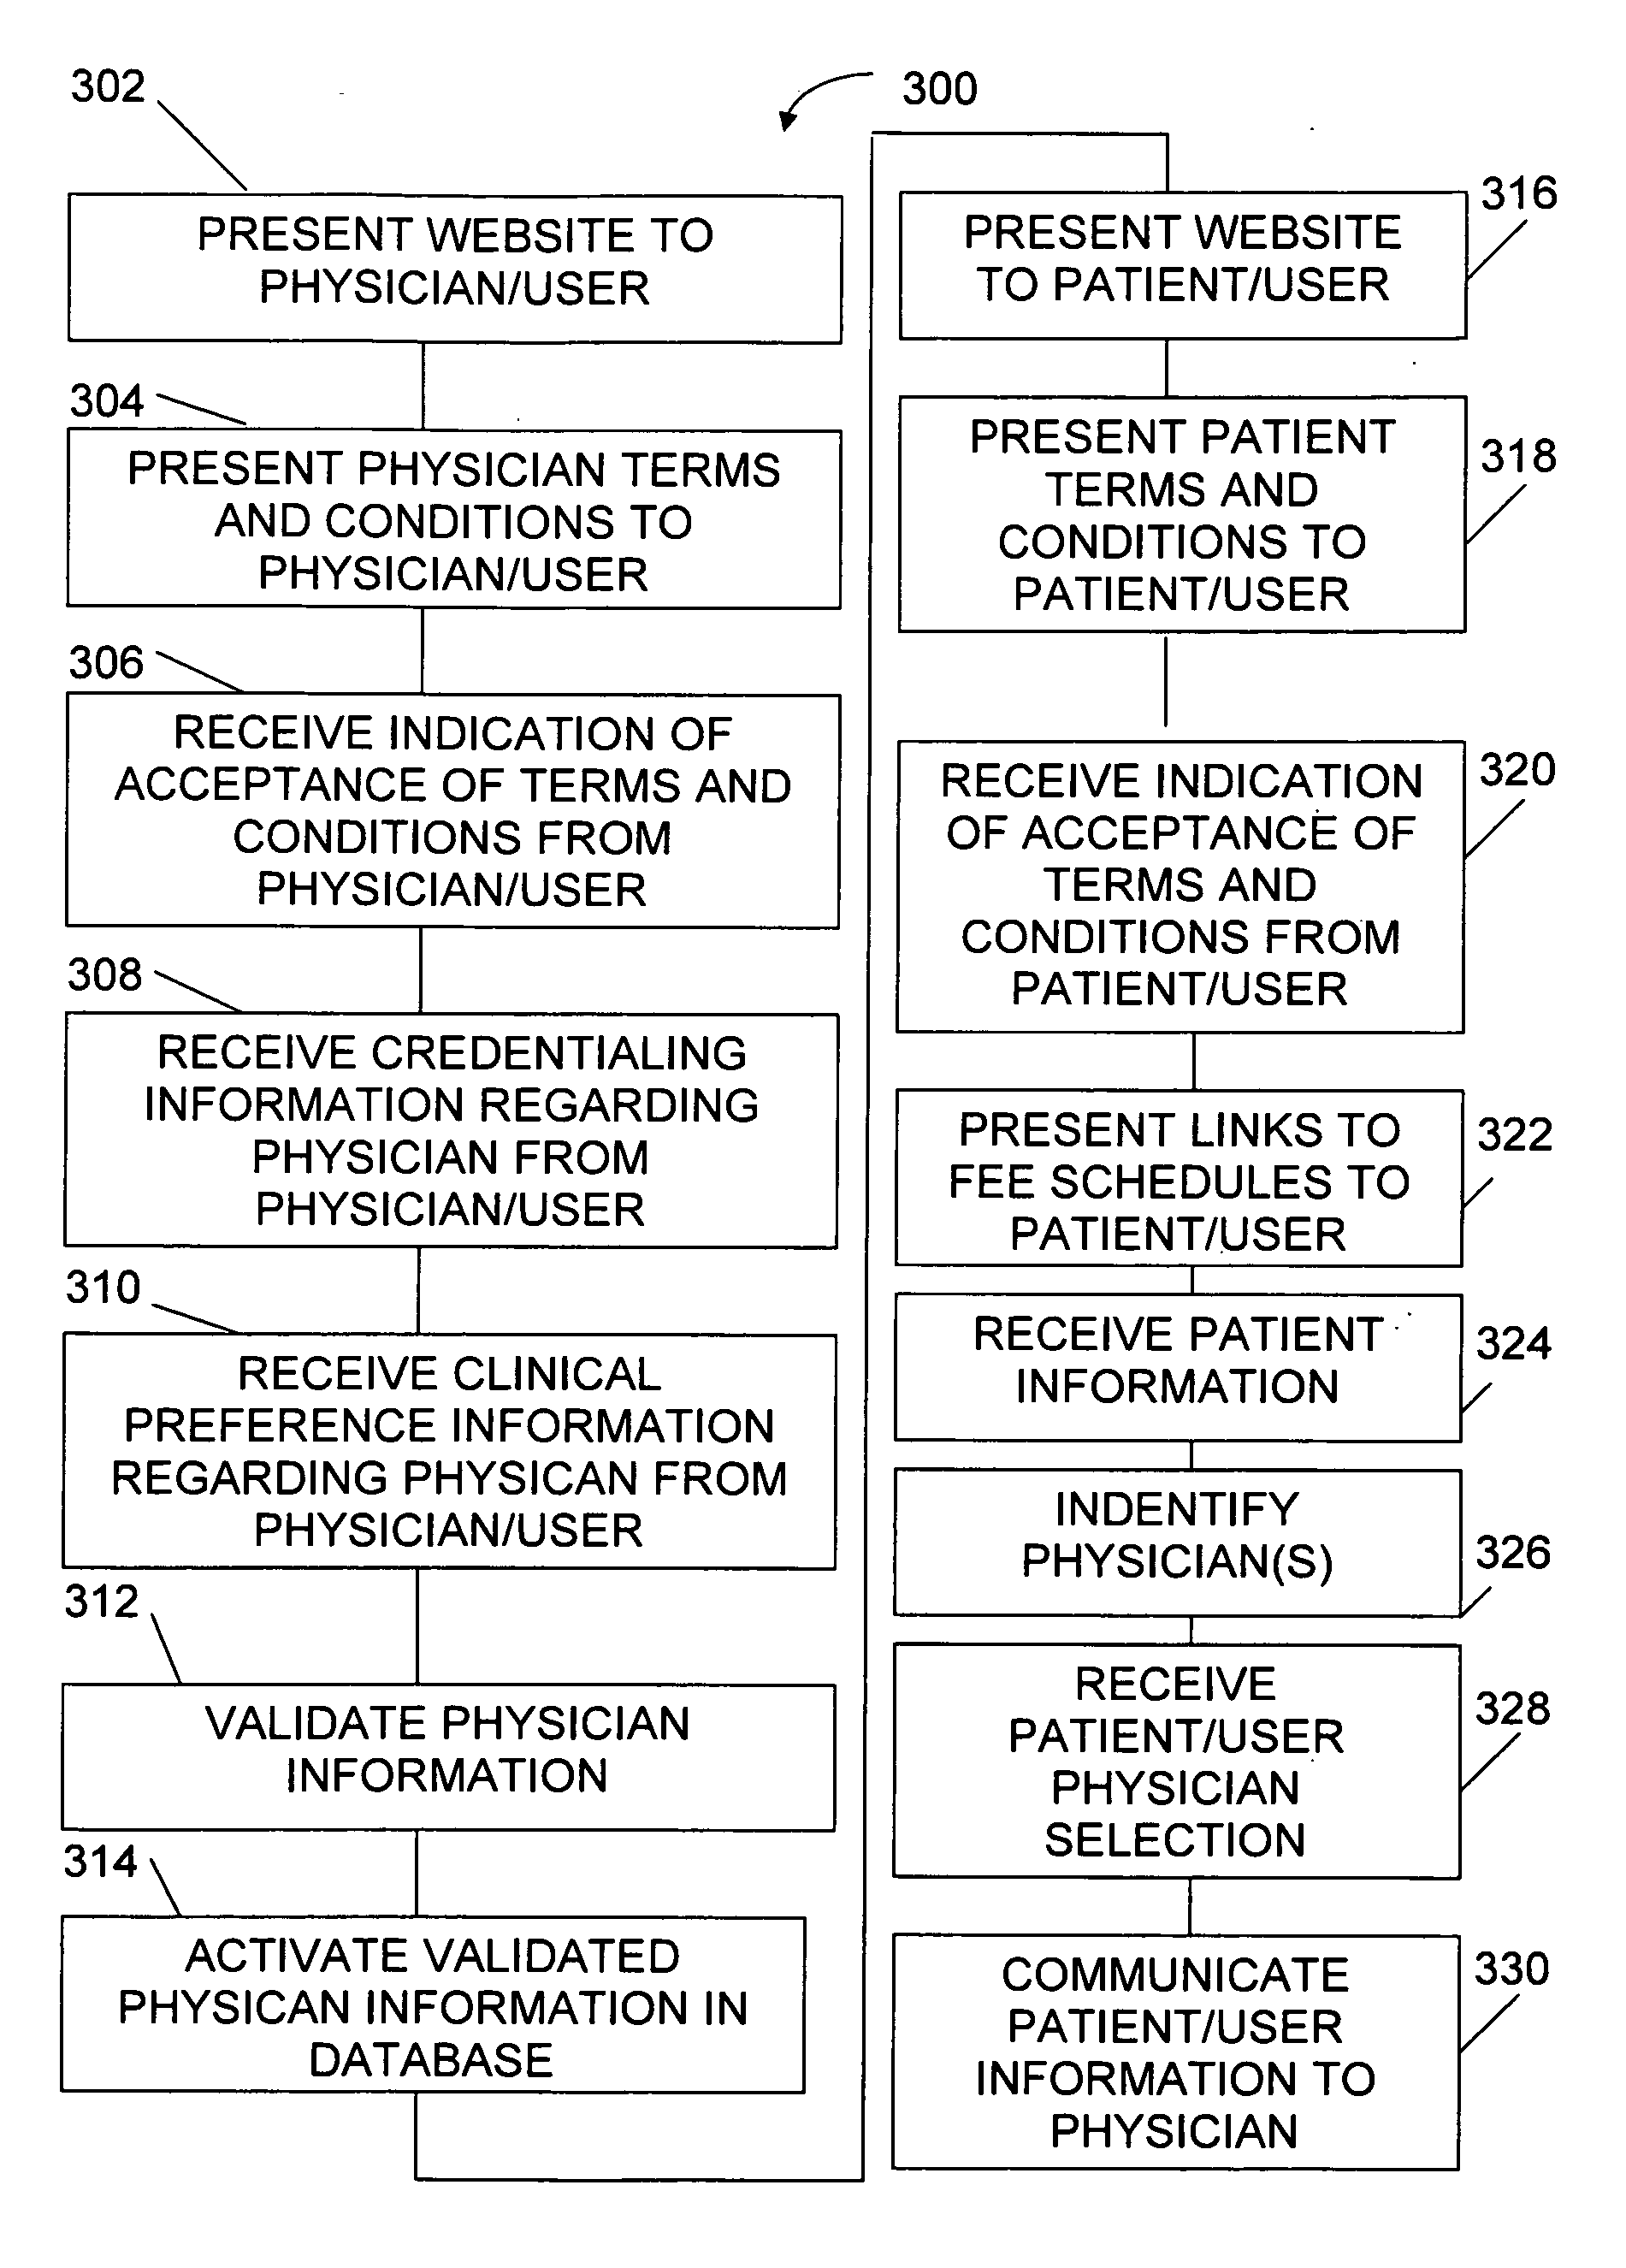 System, method and apparatus for second opinion